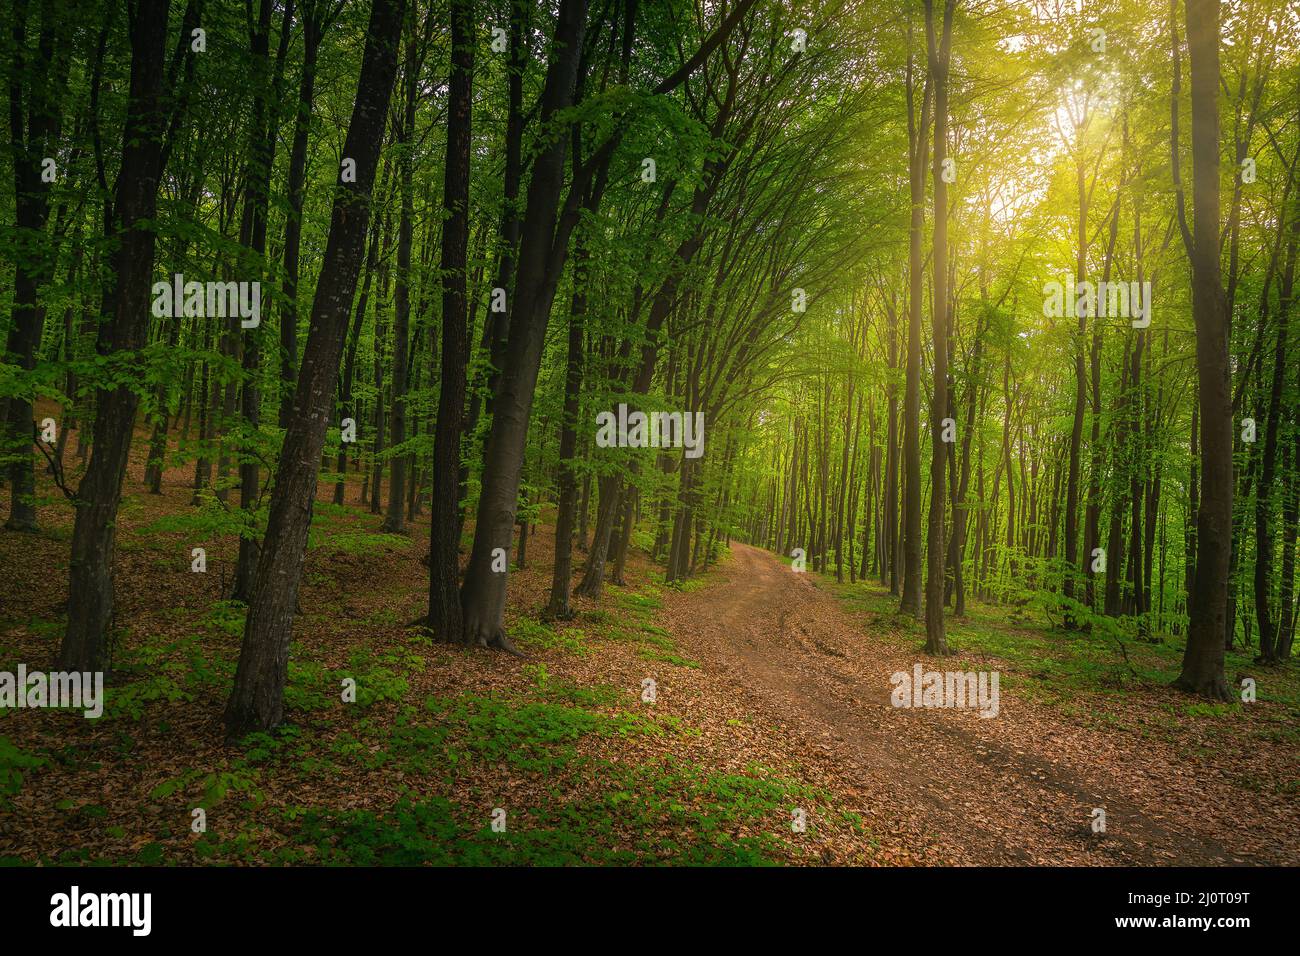 Amazing dense fresh spring forest landscape and woodland road covered with dry colorful leaves Stock Photo